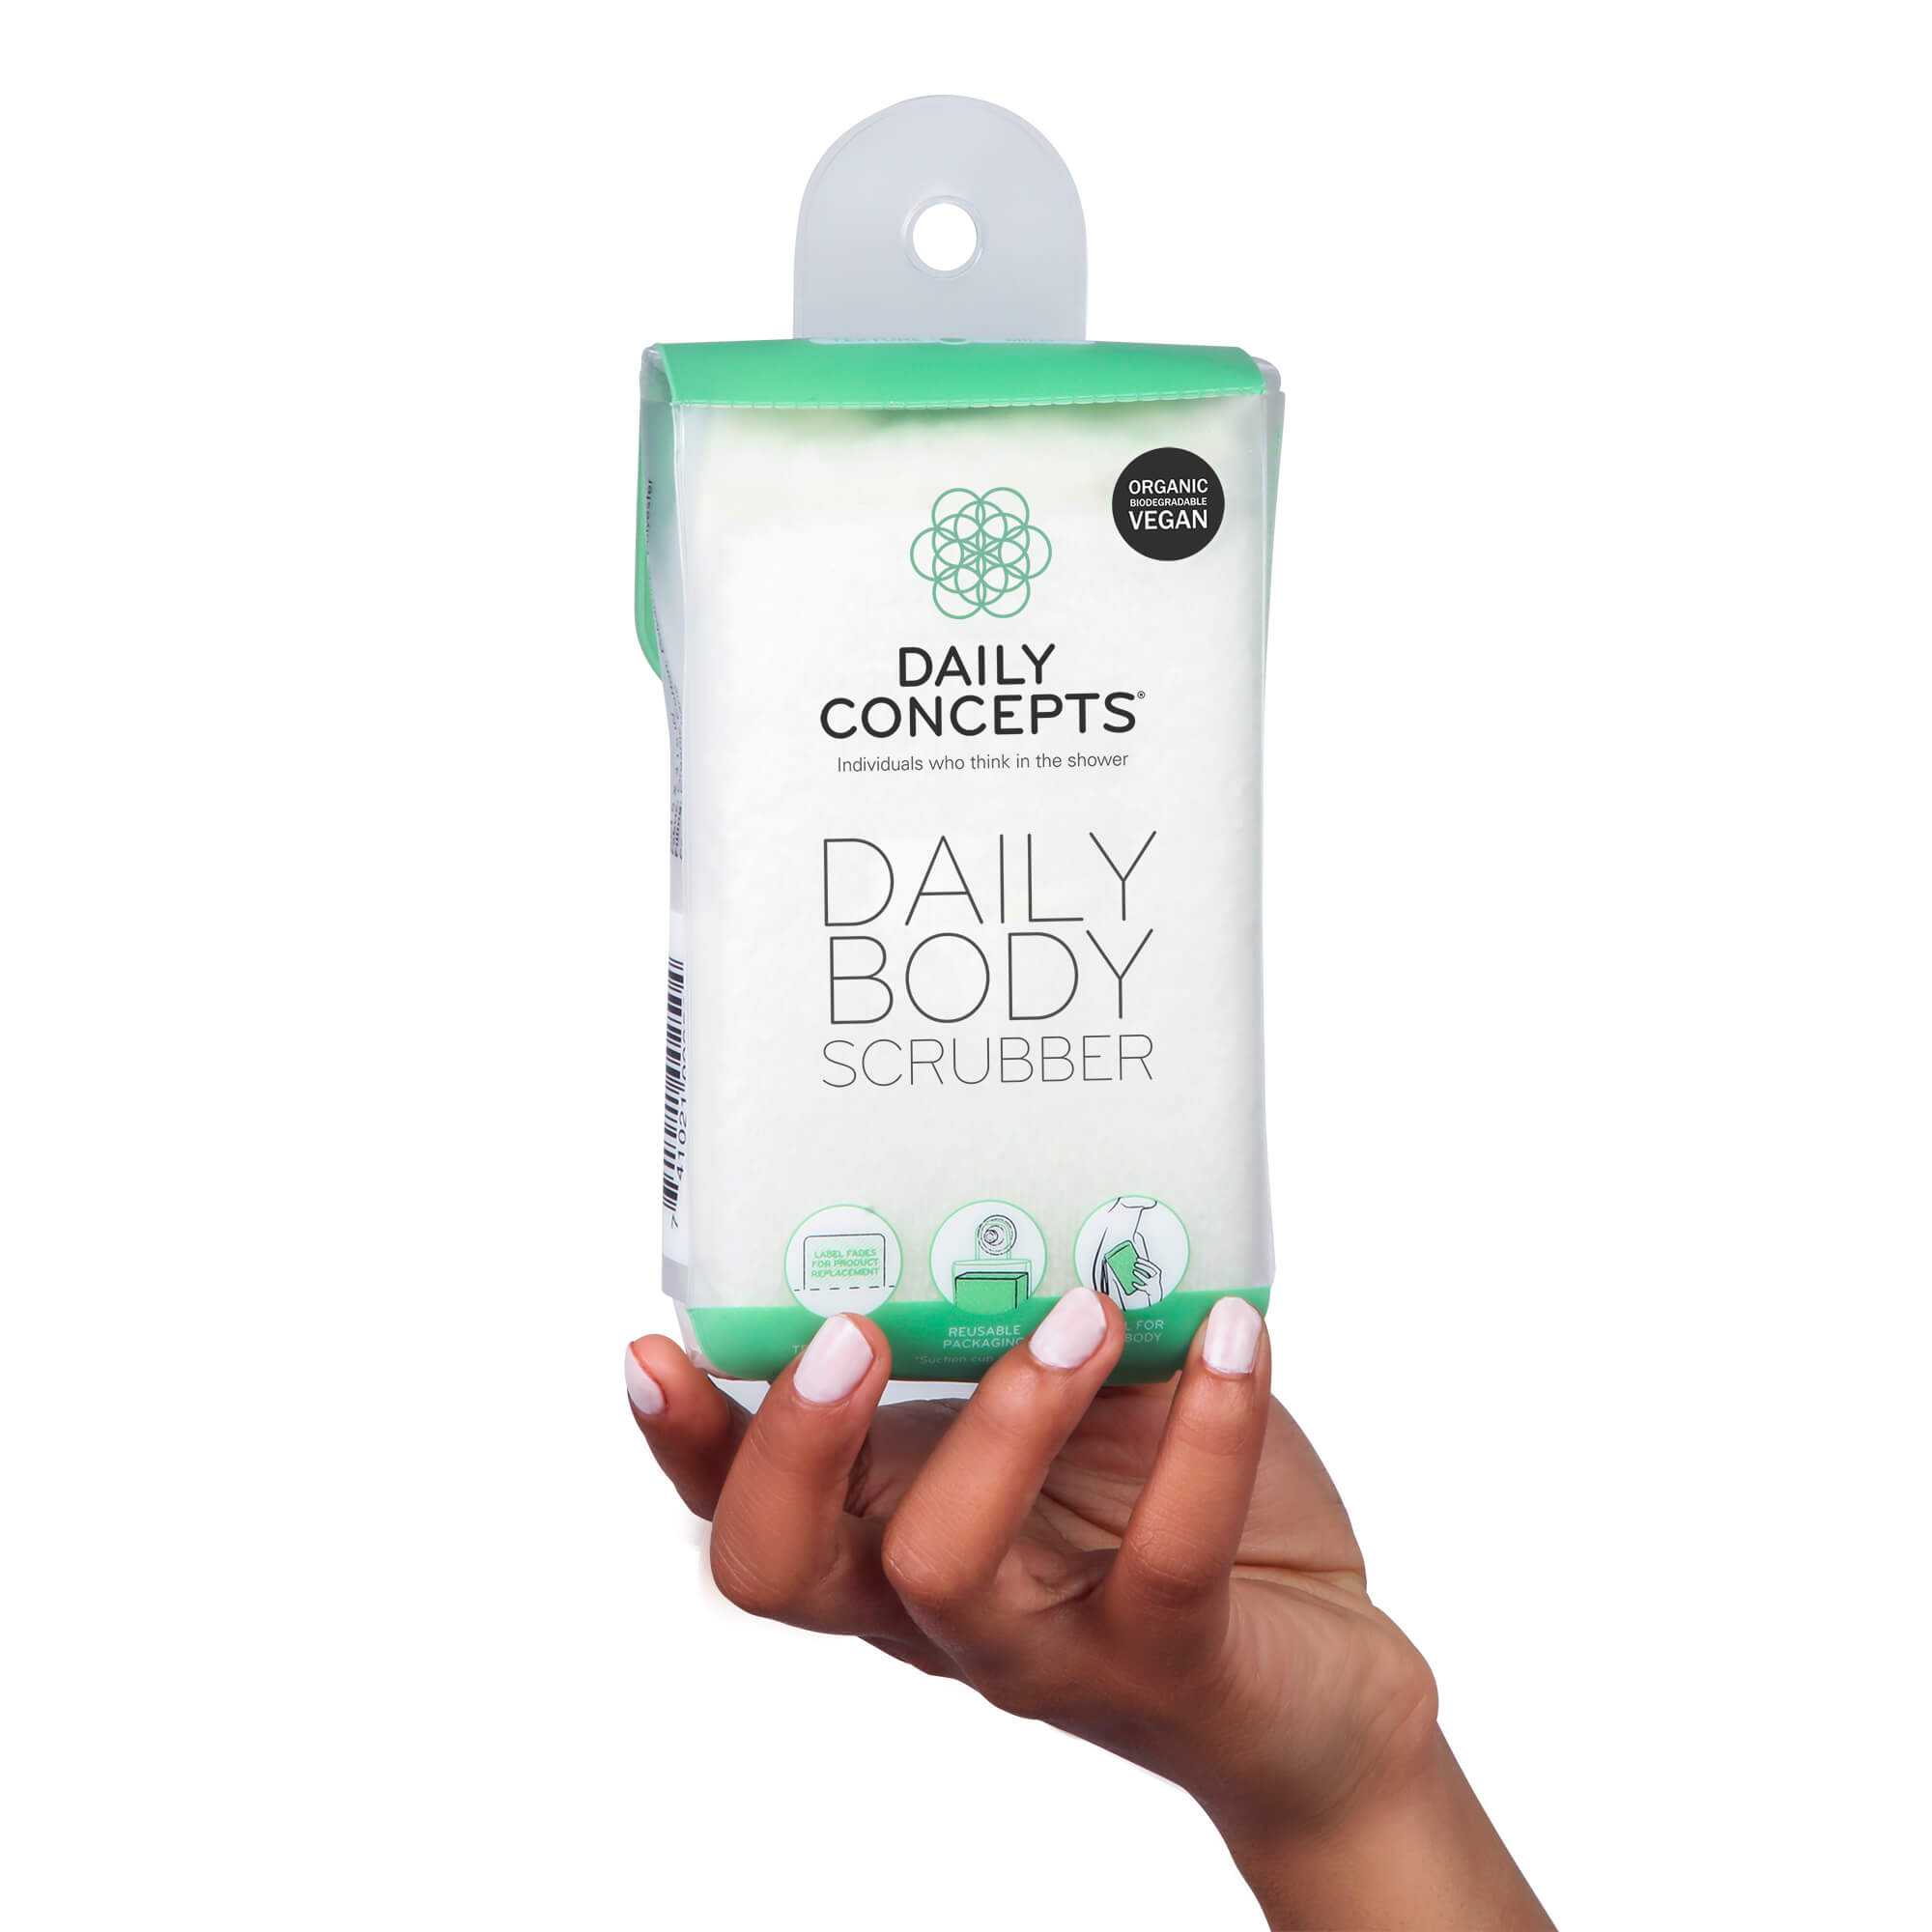 Daily Body Scrubber by Daily Concepts luxury Spa goods – DAILY